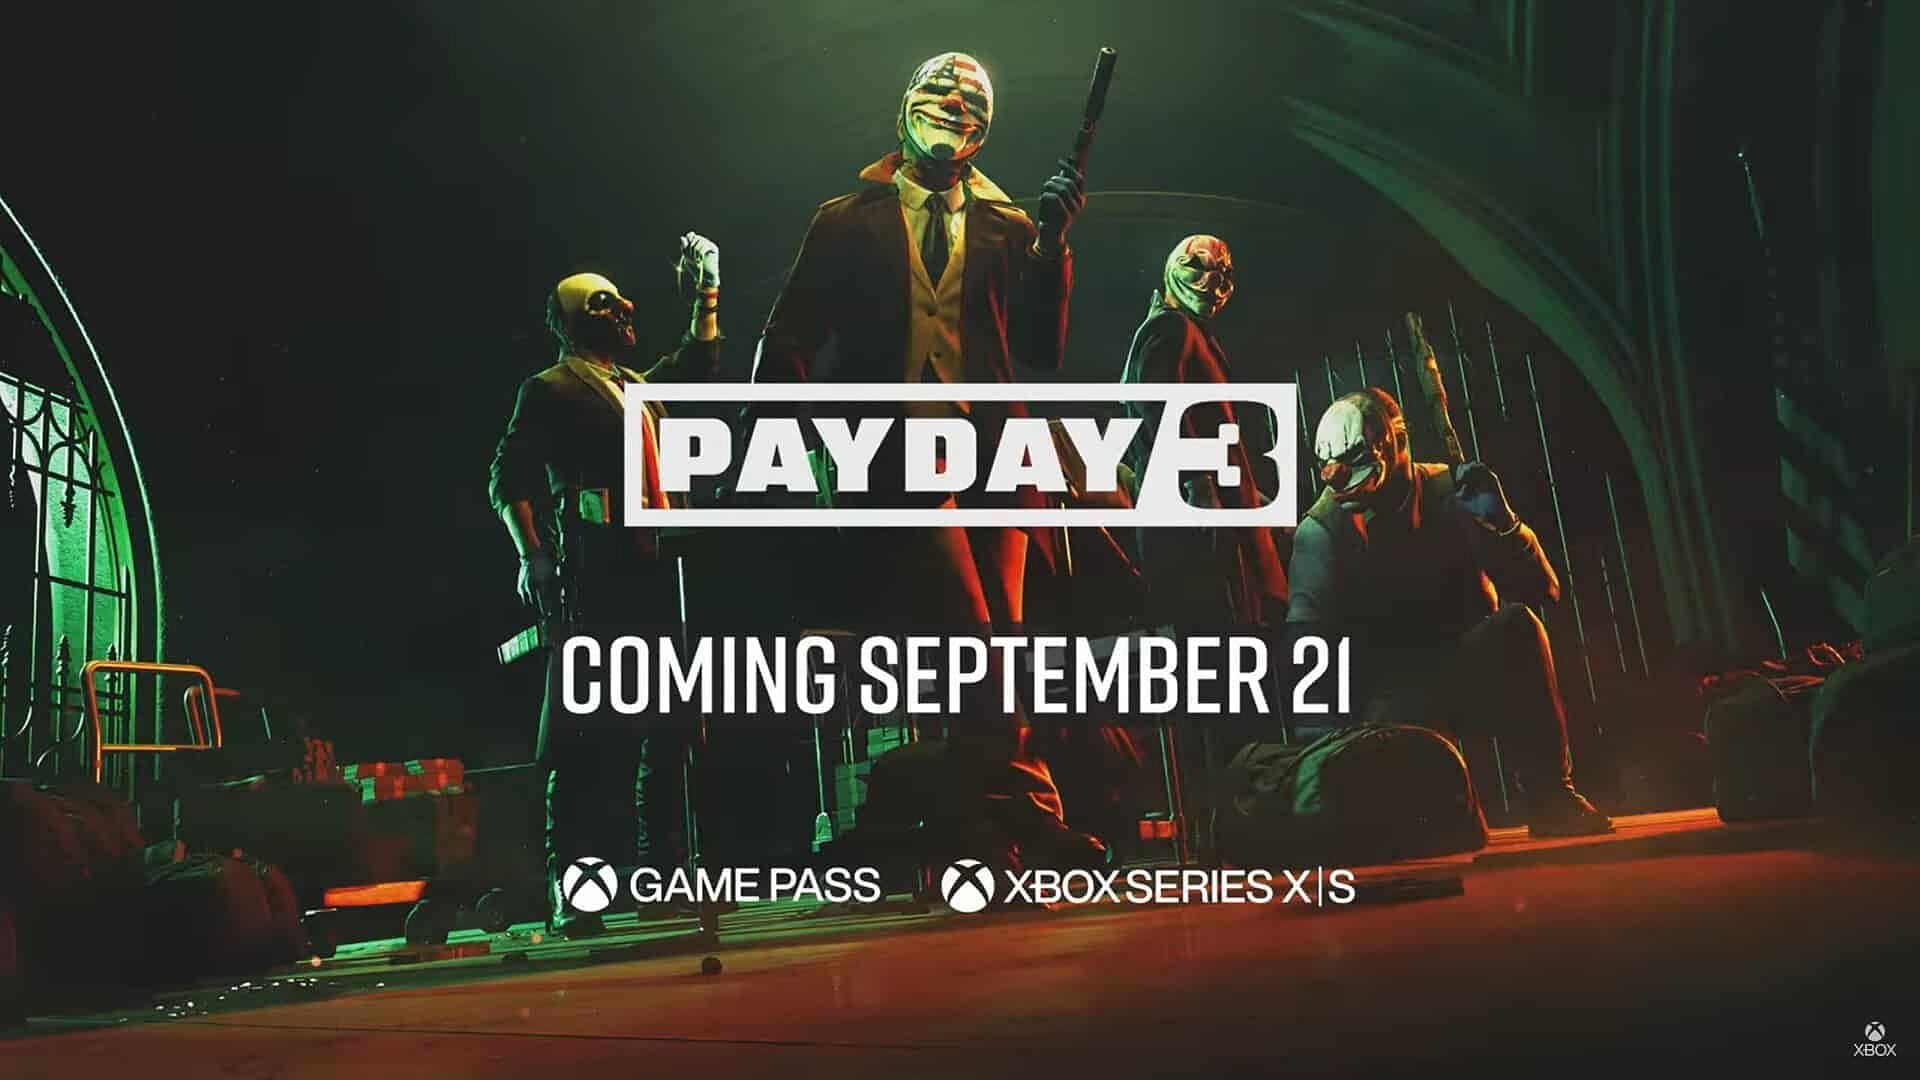 Payday 3 Gets Release Date, is Headed to Game Pass - IGN